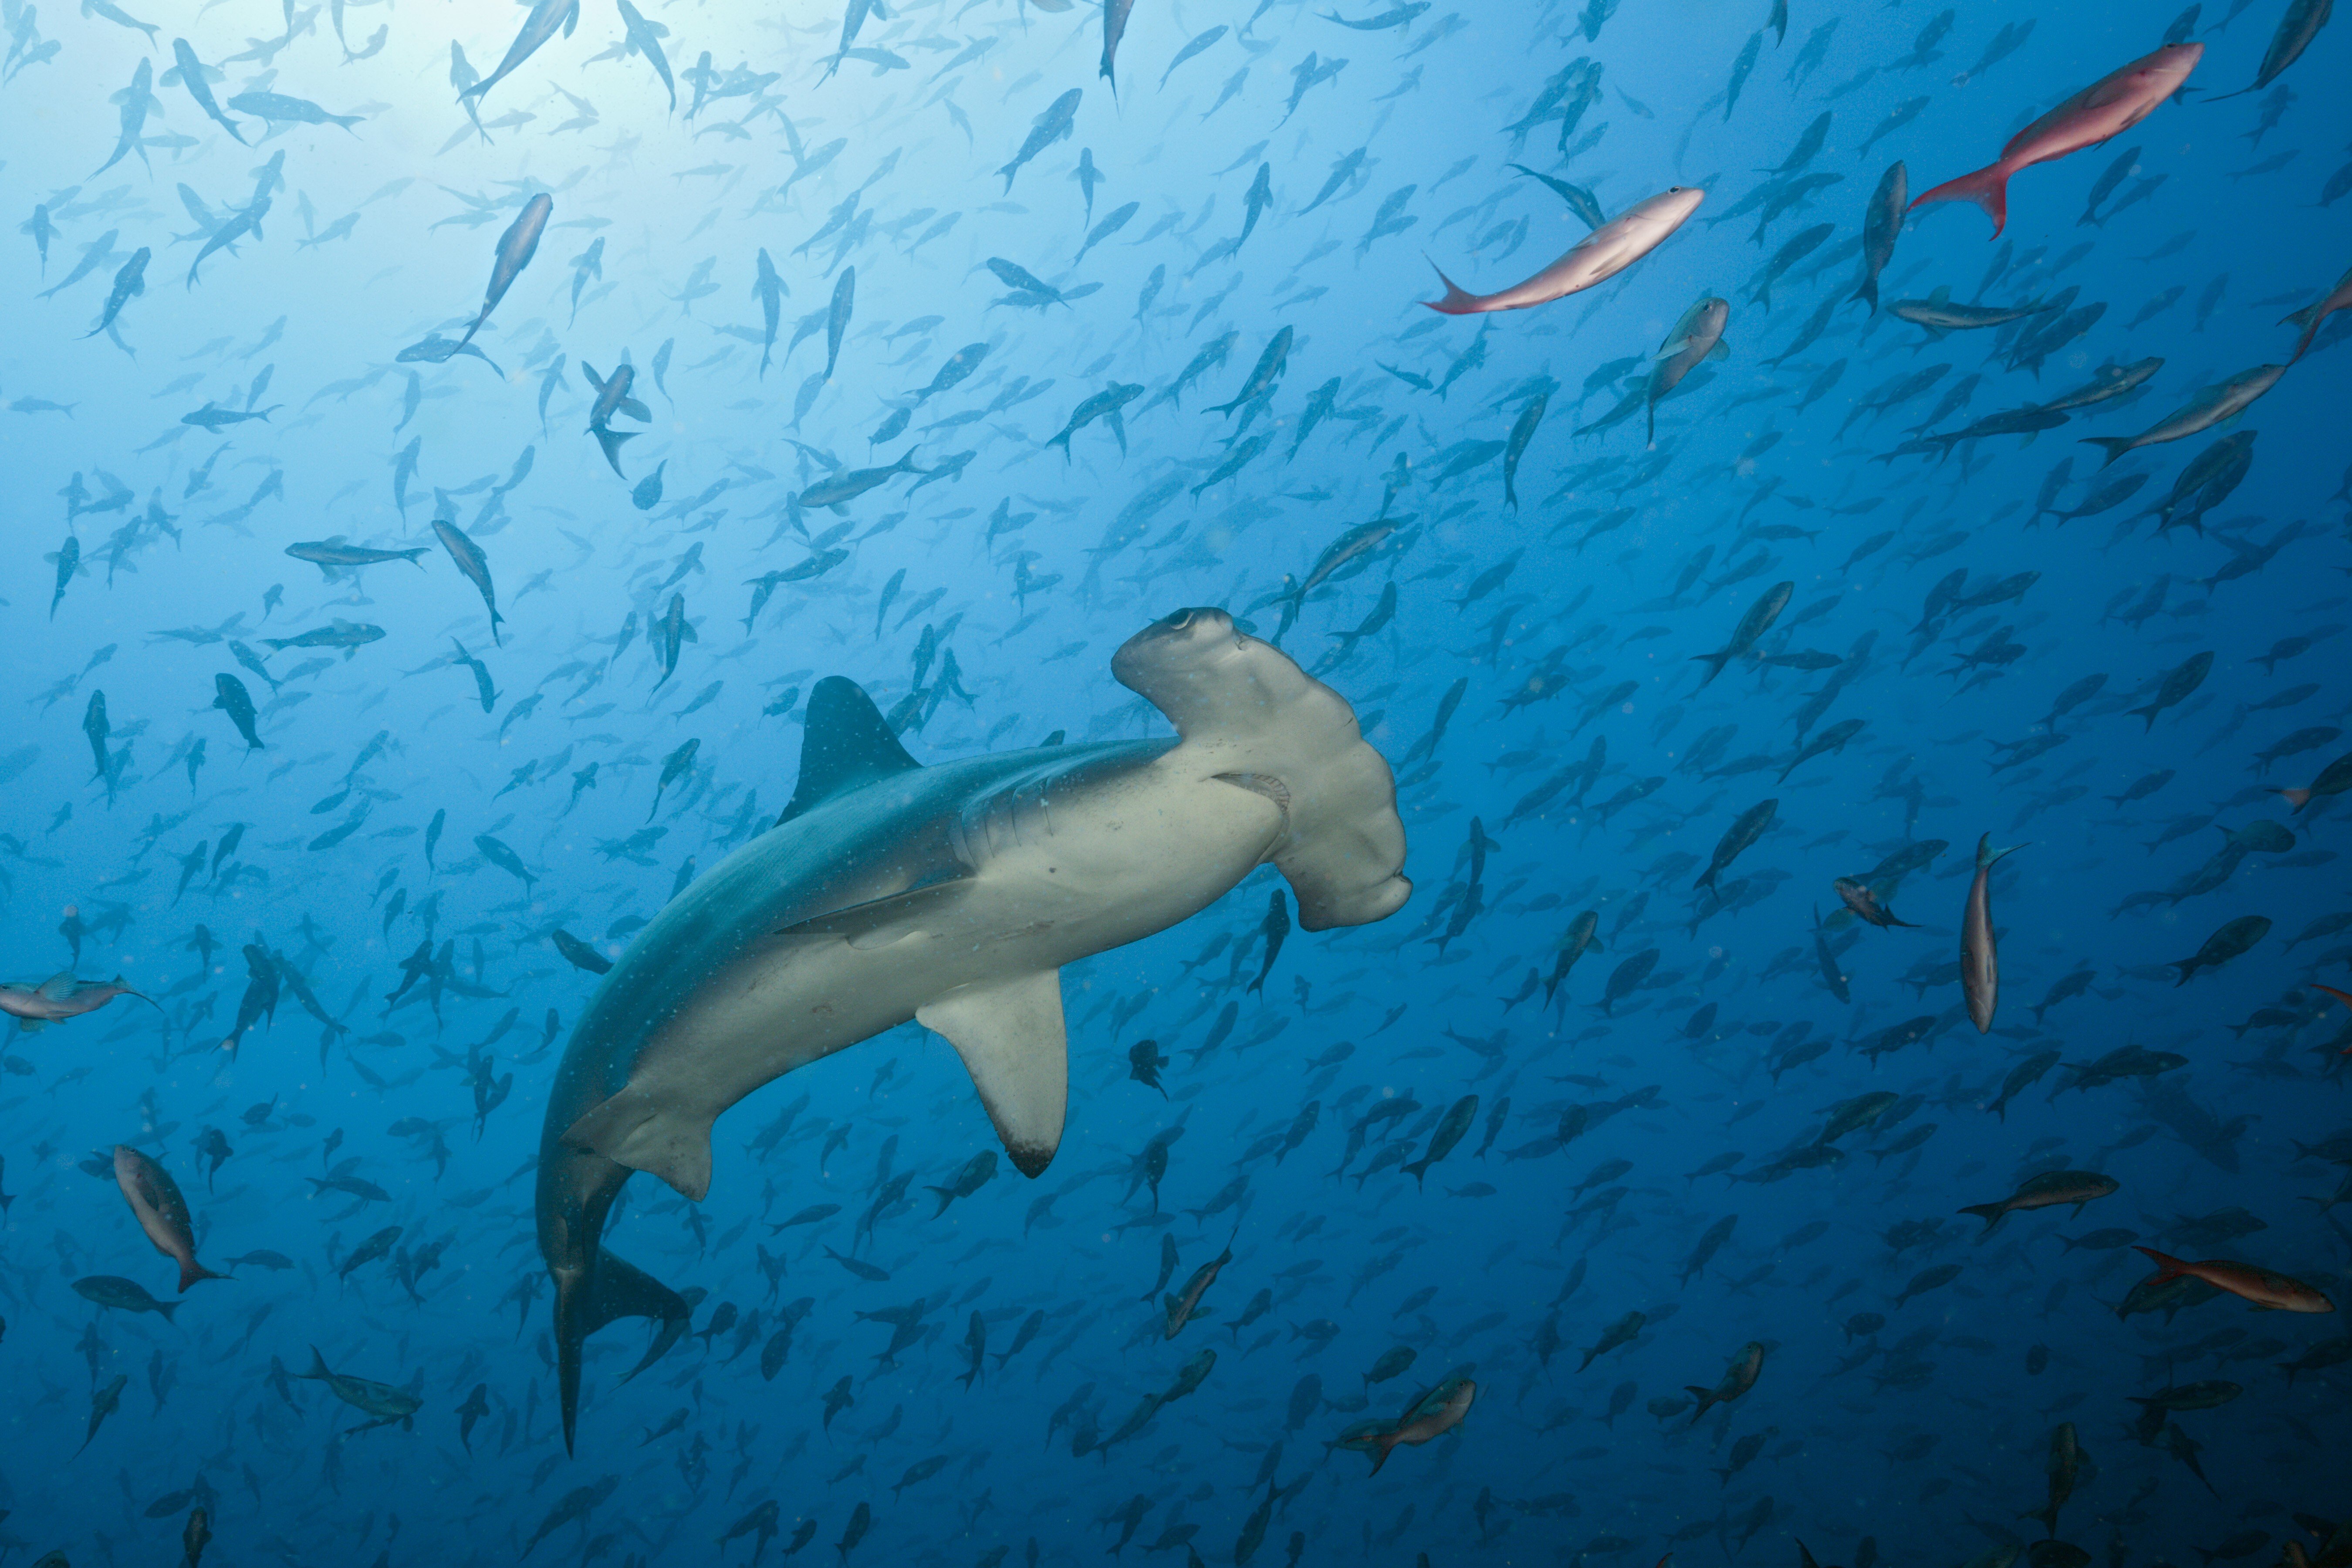 Killing sharks “potentially sets up an ecosystem to collapse”, according to an expert. Photo: Getty Images